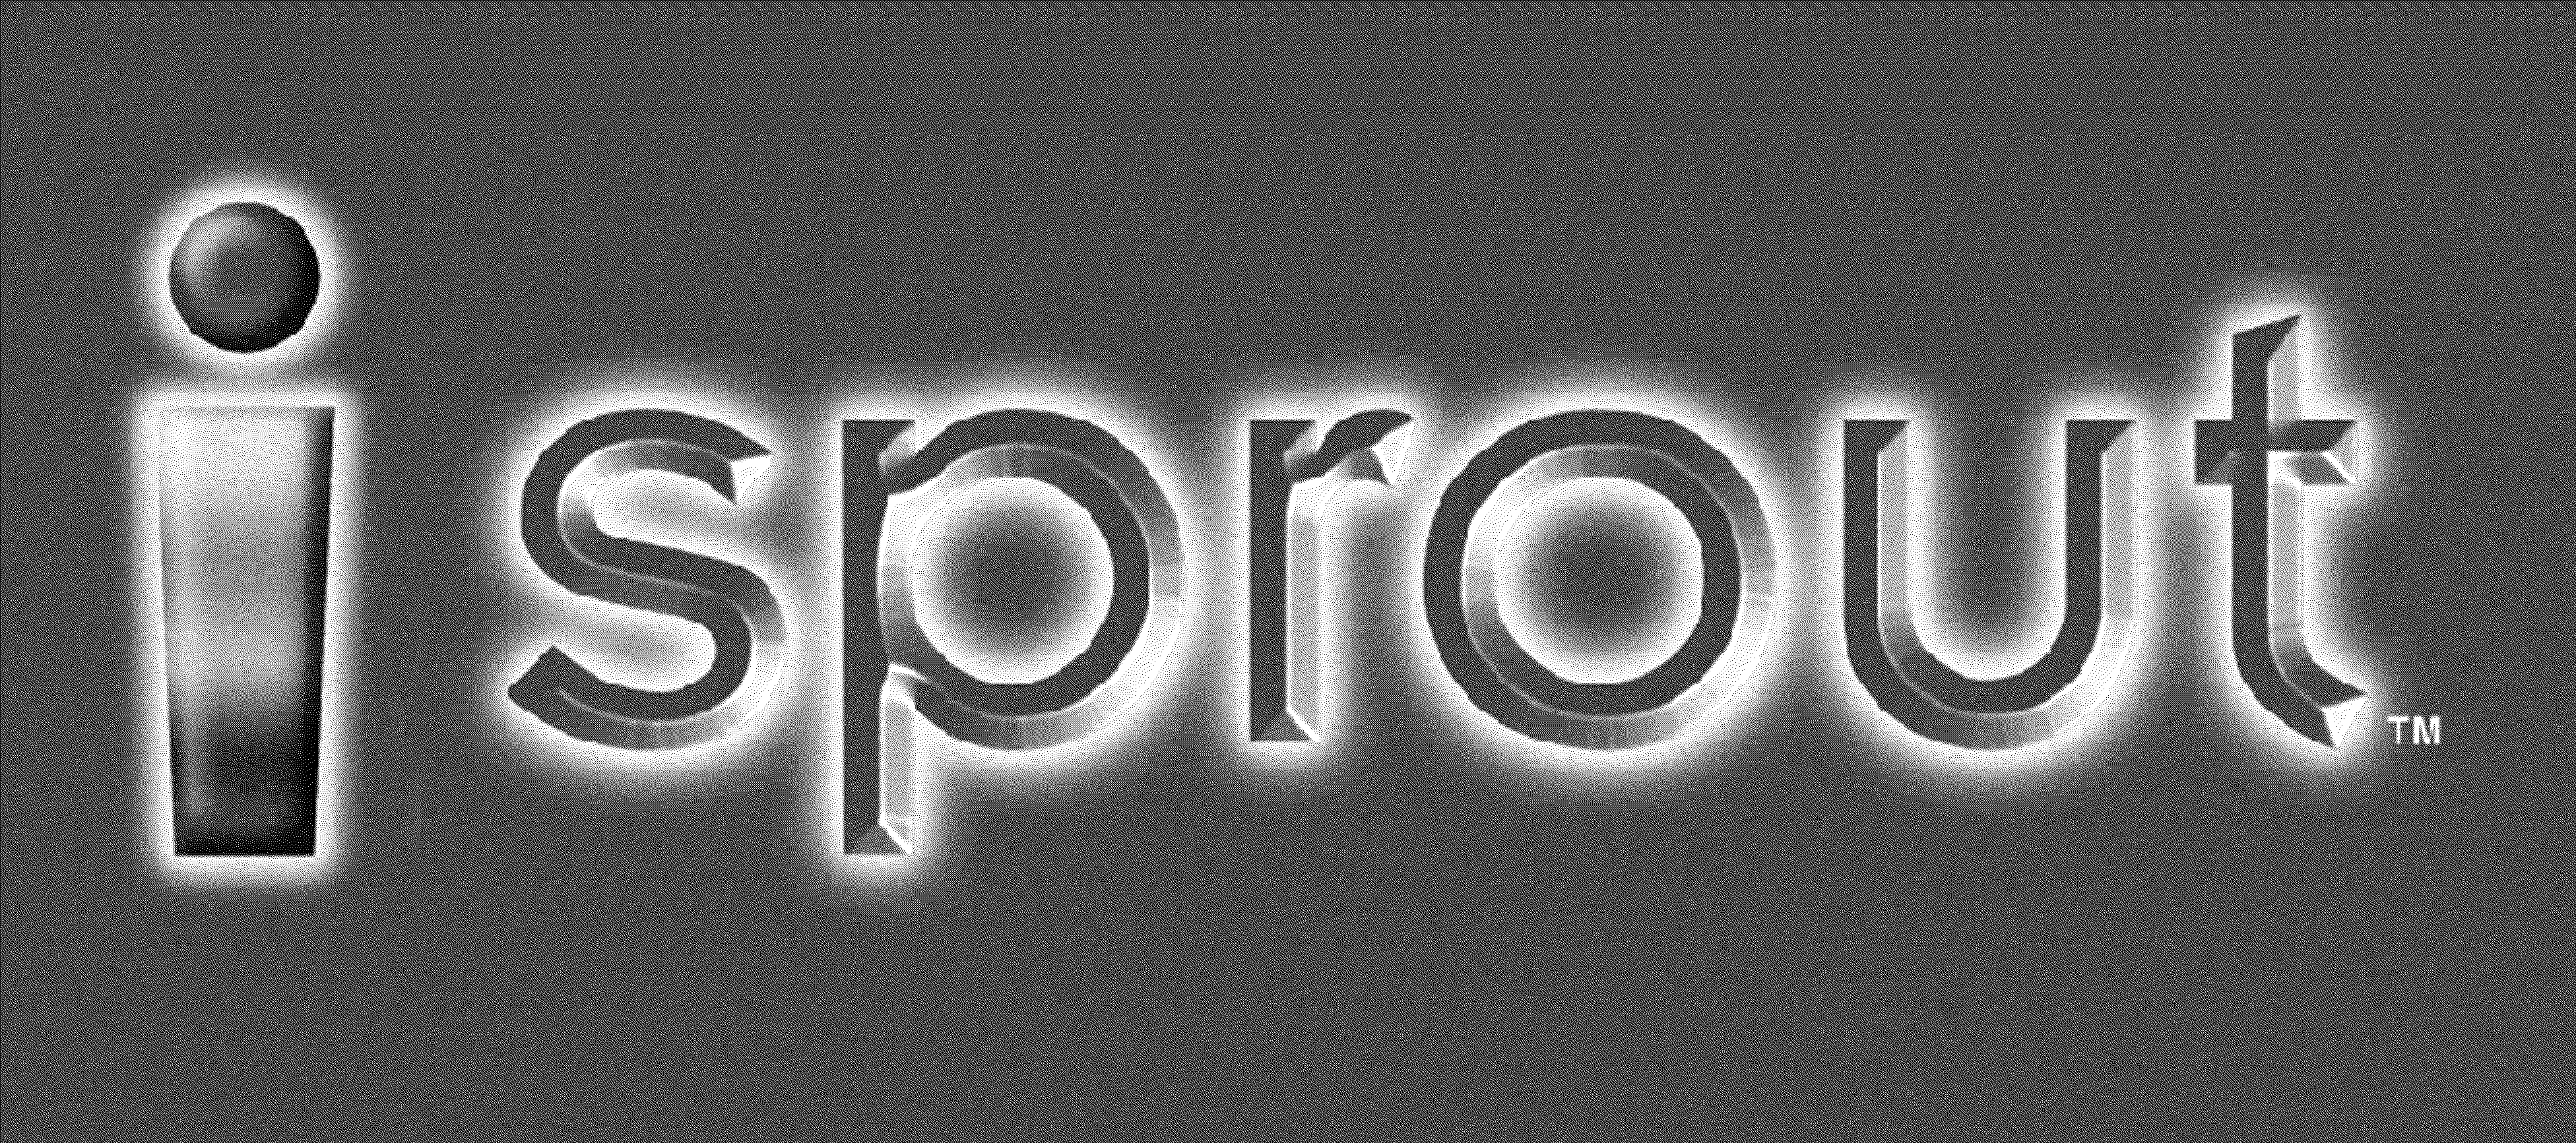  I SPROUT